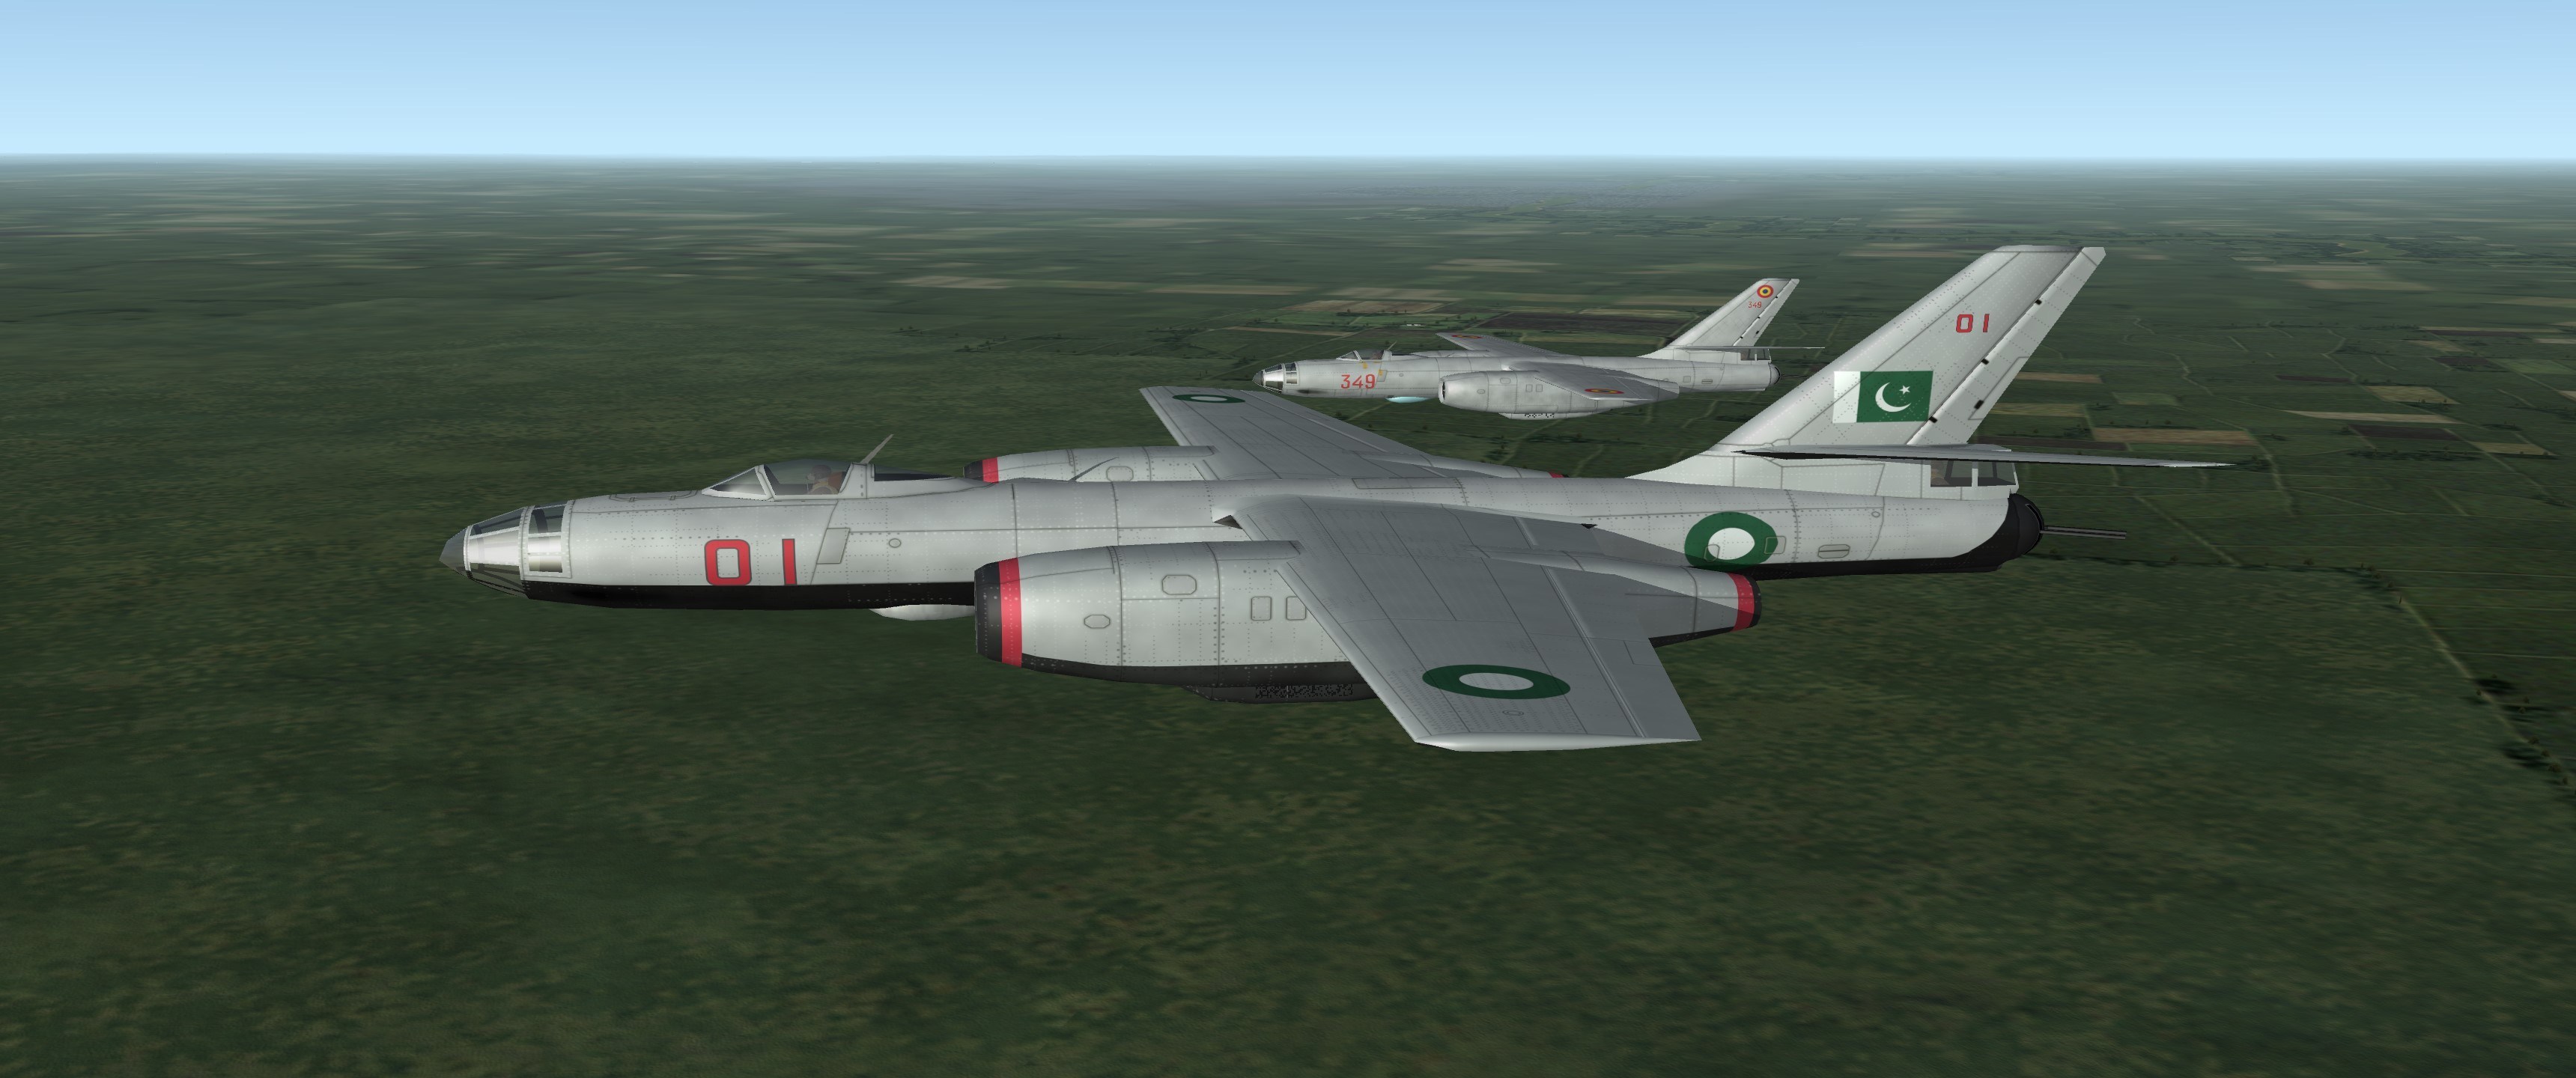 IL-28 - H-5 COLLECTION